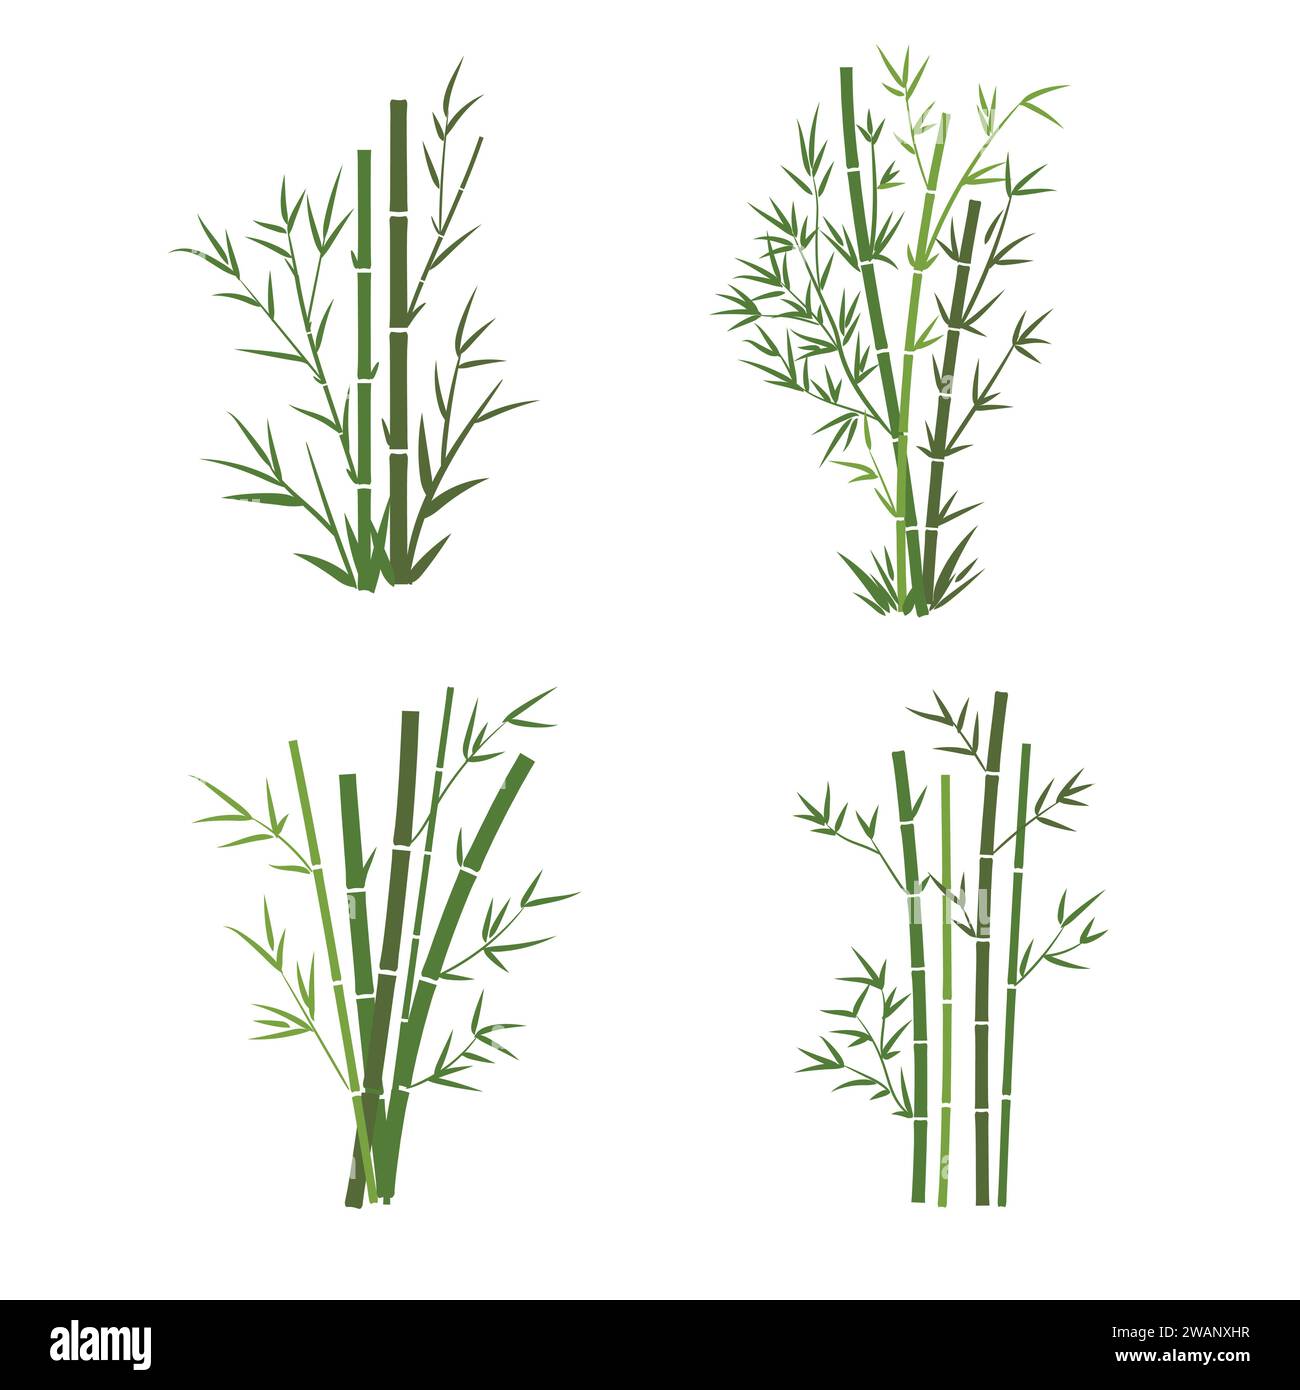 Bamboo tree leaf vector illustration , plant stem and stick. Bamboo green and brown decoration elements Stock Vector